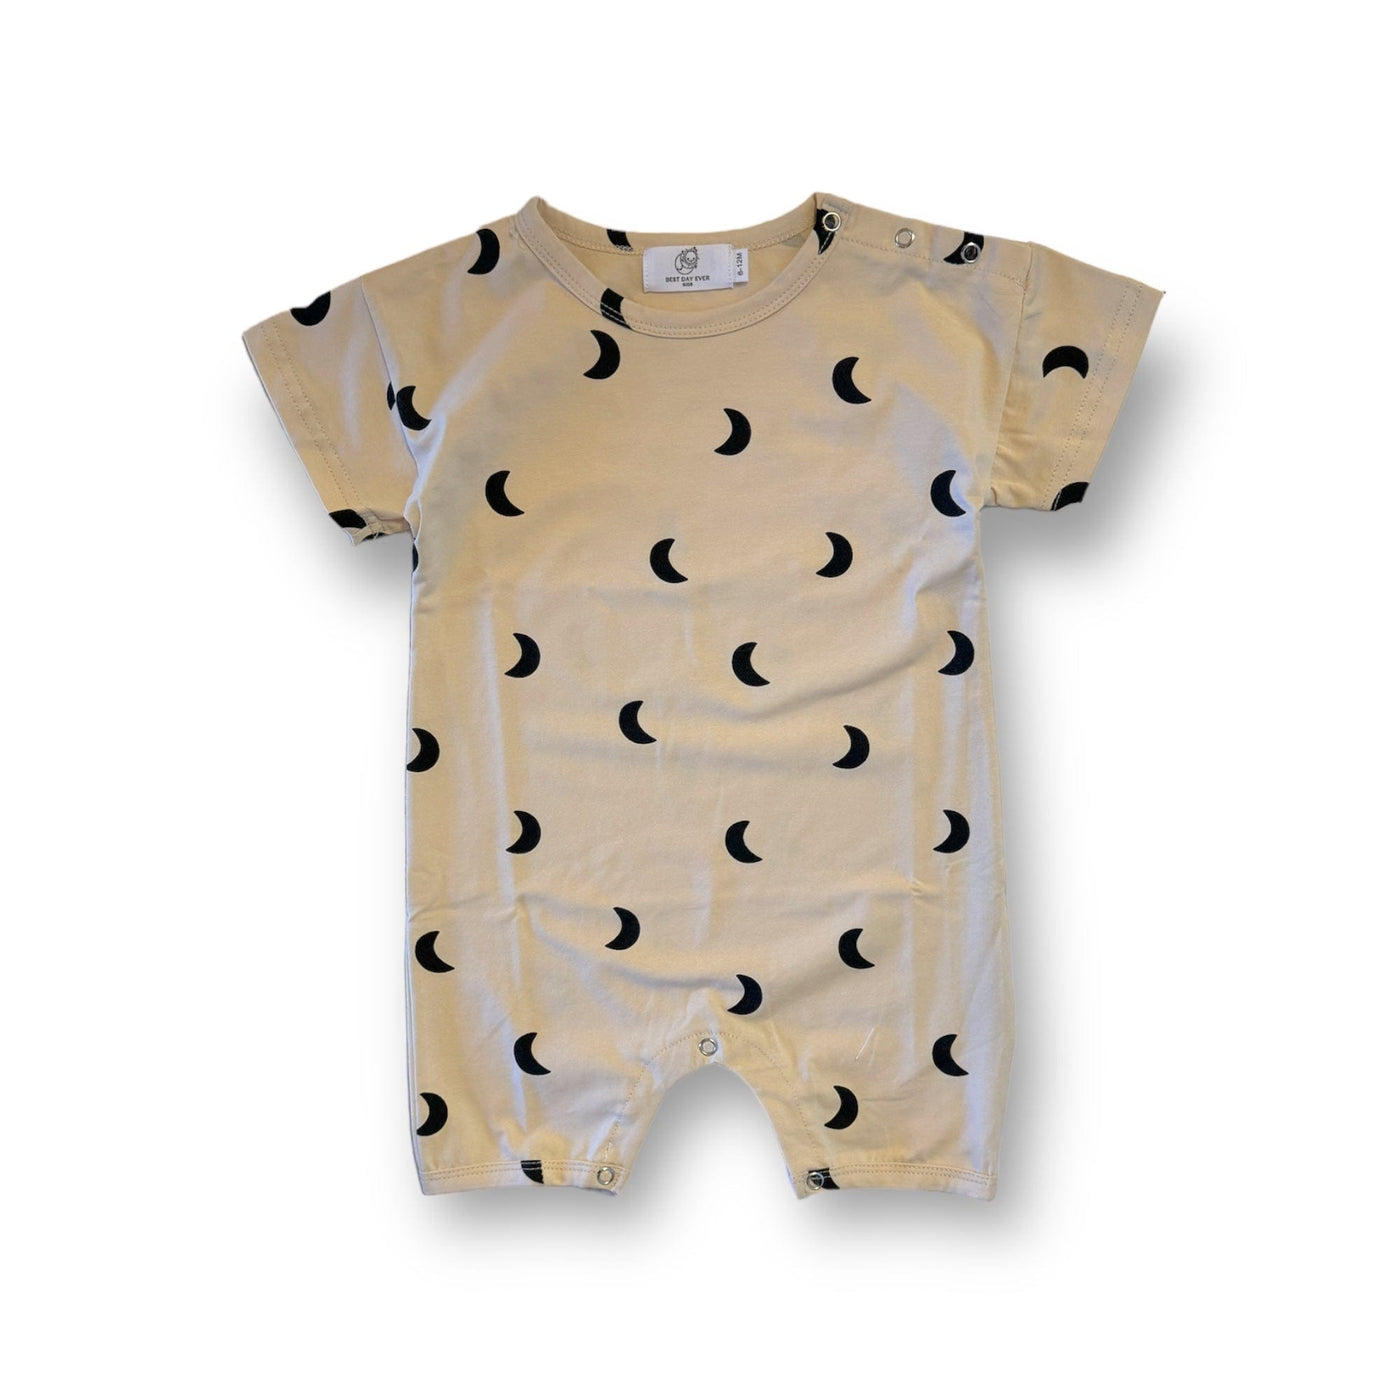 Best Day Ever Kids Baby One-Pieces 0-3M Petit Moon Romper - Ivory buy online boutique kids clothing